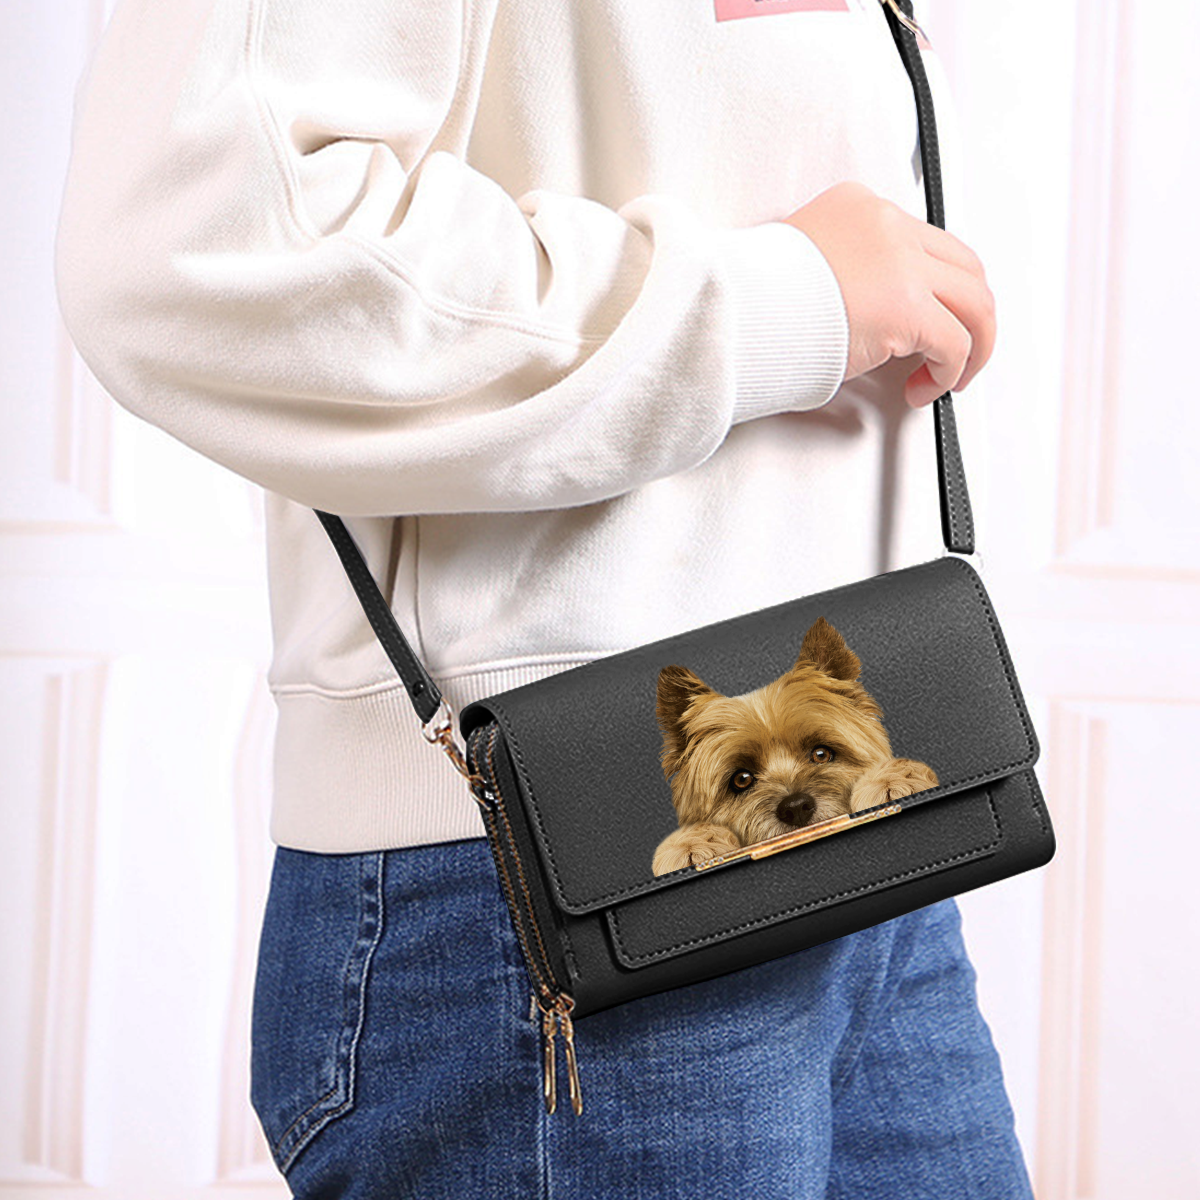 Can You See - Cairn Terrier Crossbody Purse Women Clutch V1